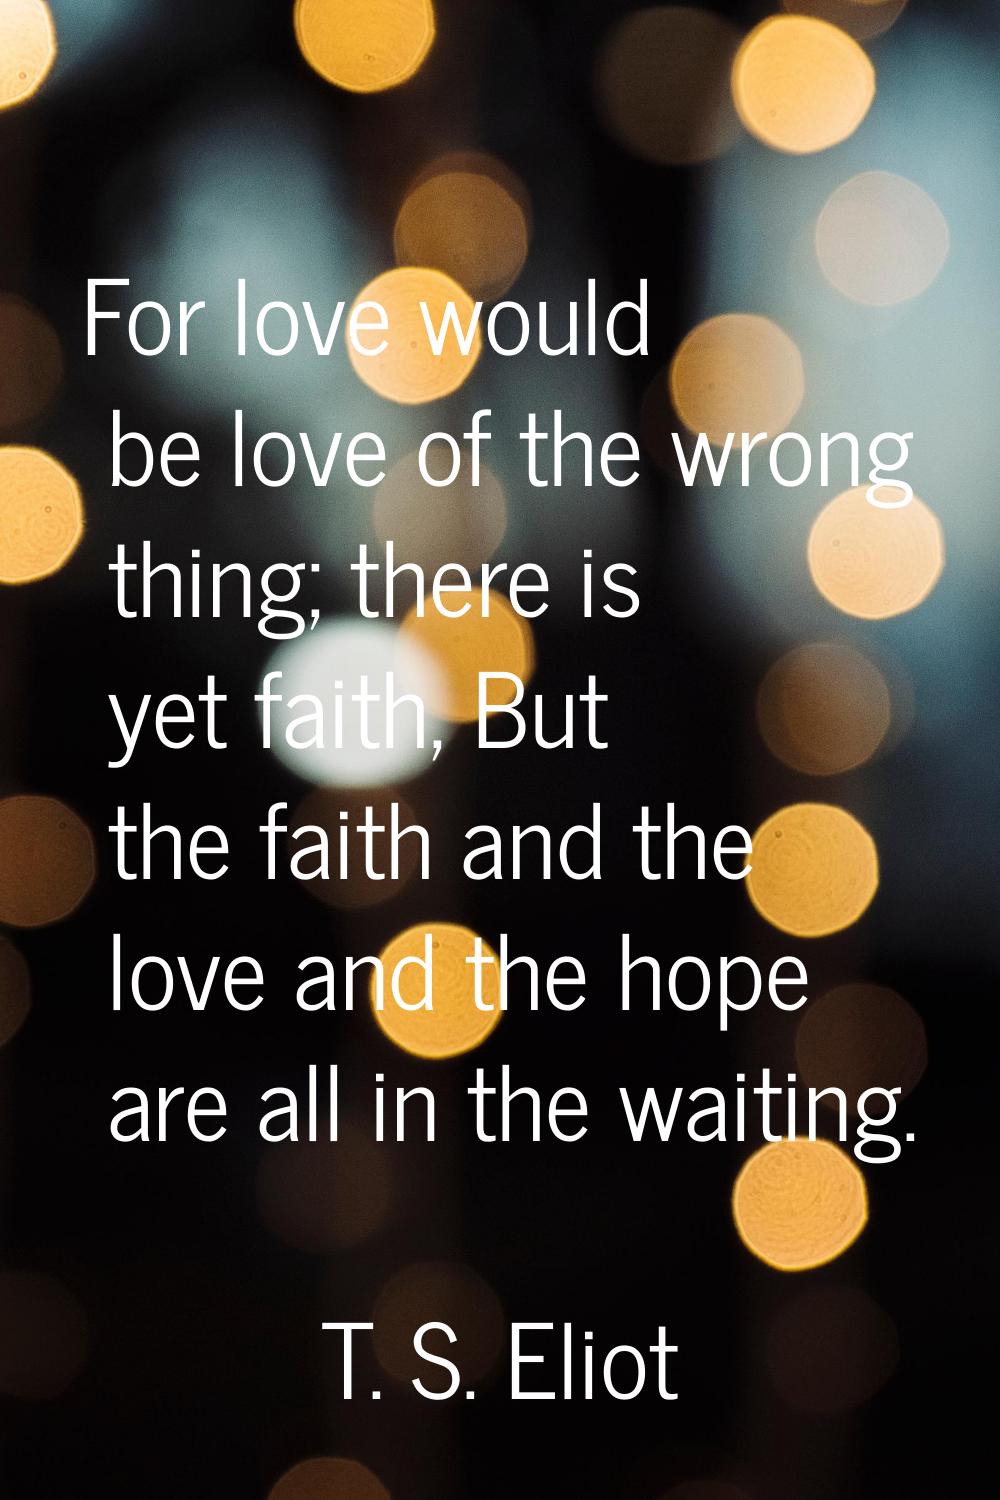 For love would be love of the wrong thing; there is yet faith, But the faith and the love and the h